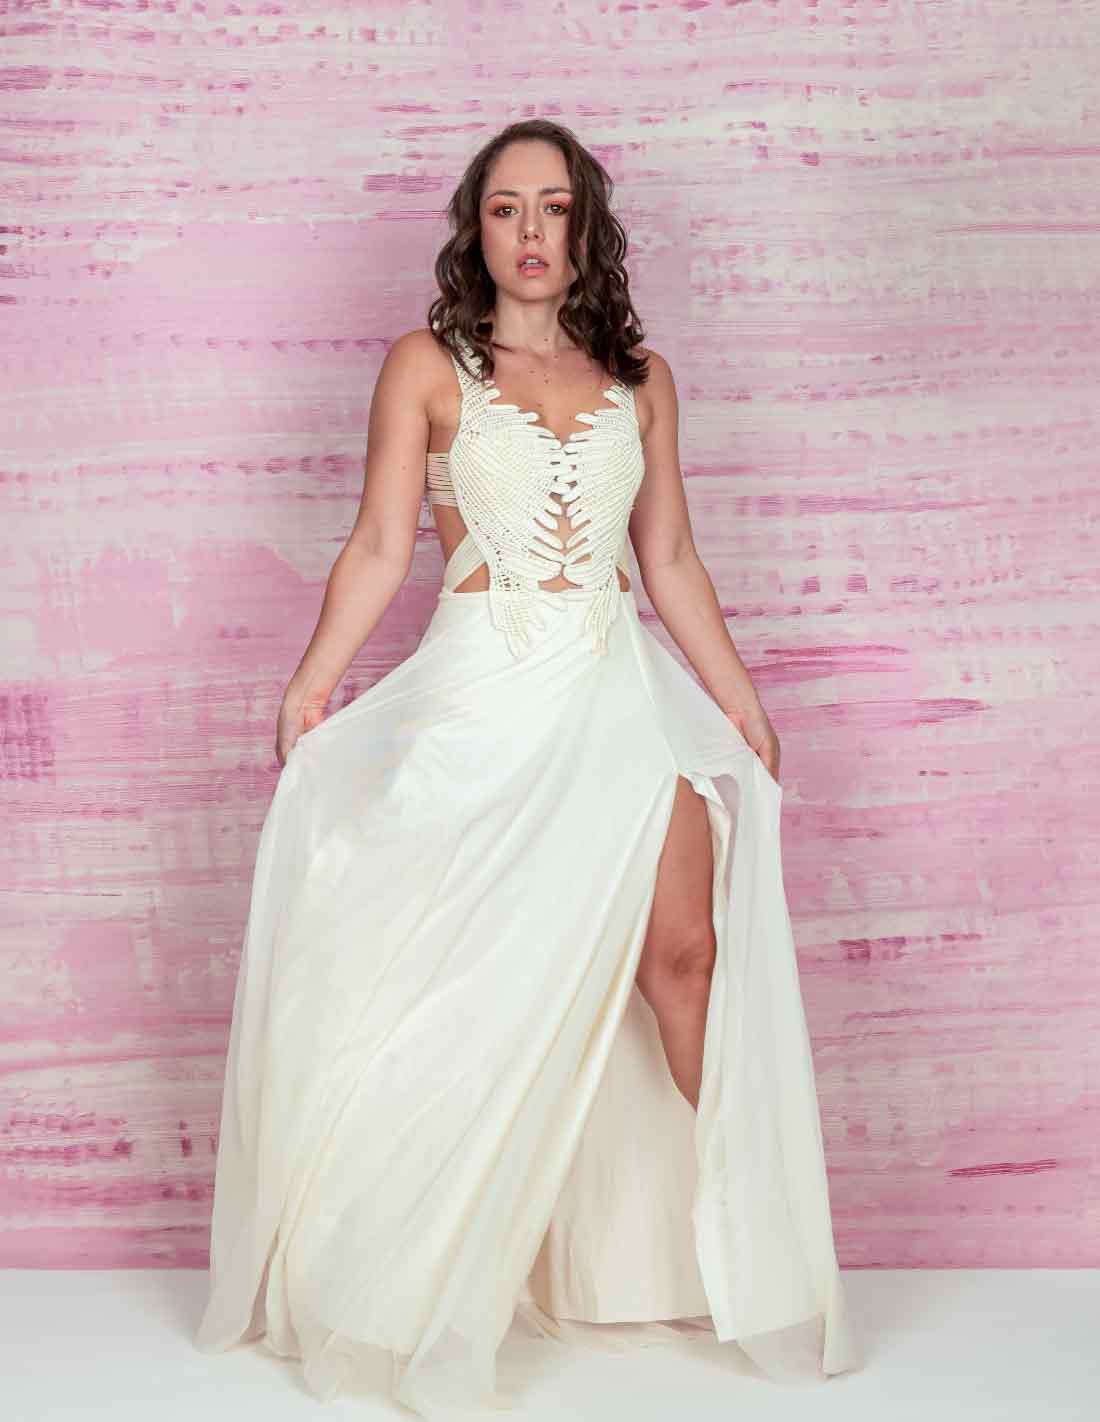 Dream Dress Ivory. Dress With Hand Woven Macramé In Ivory. Entreaguas